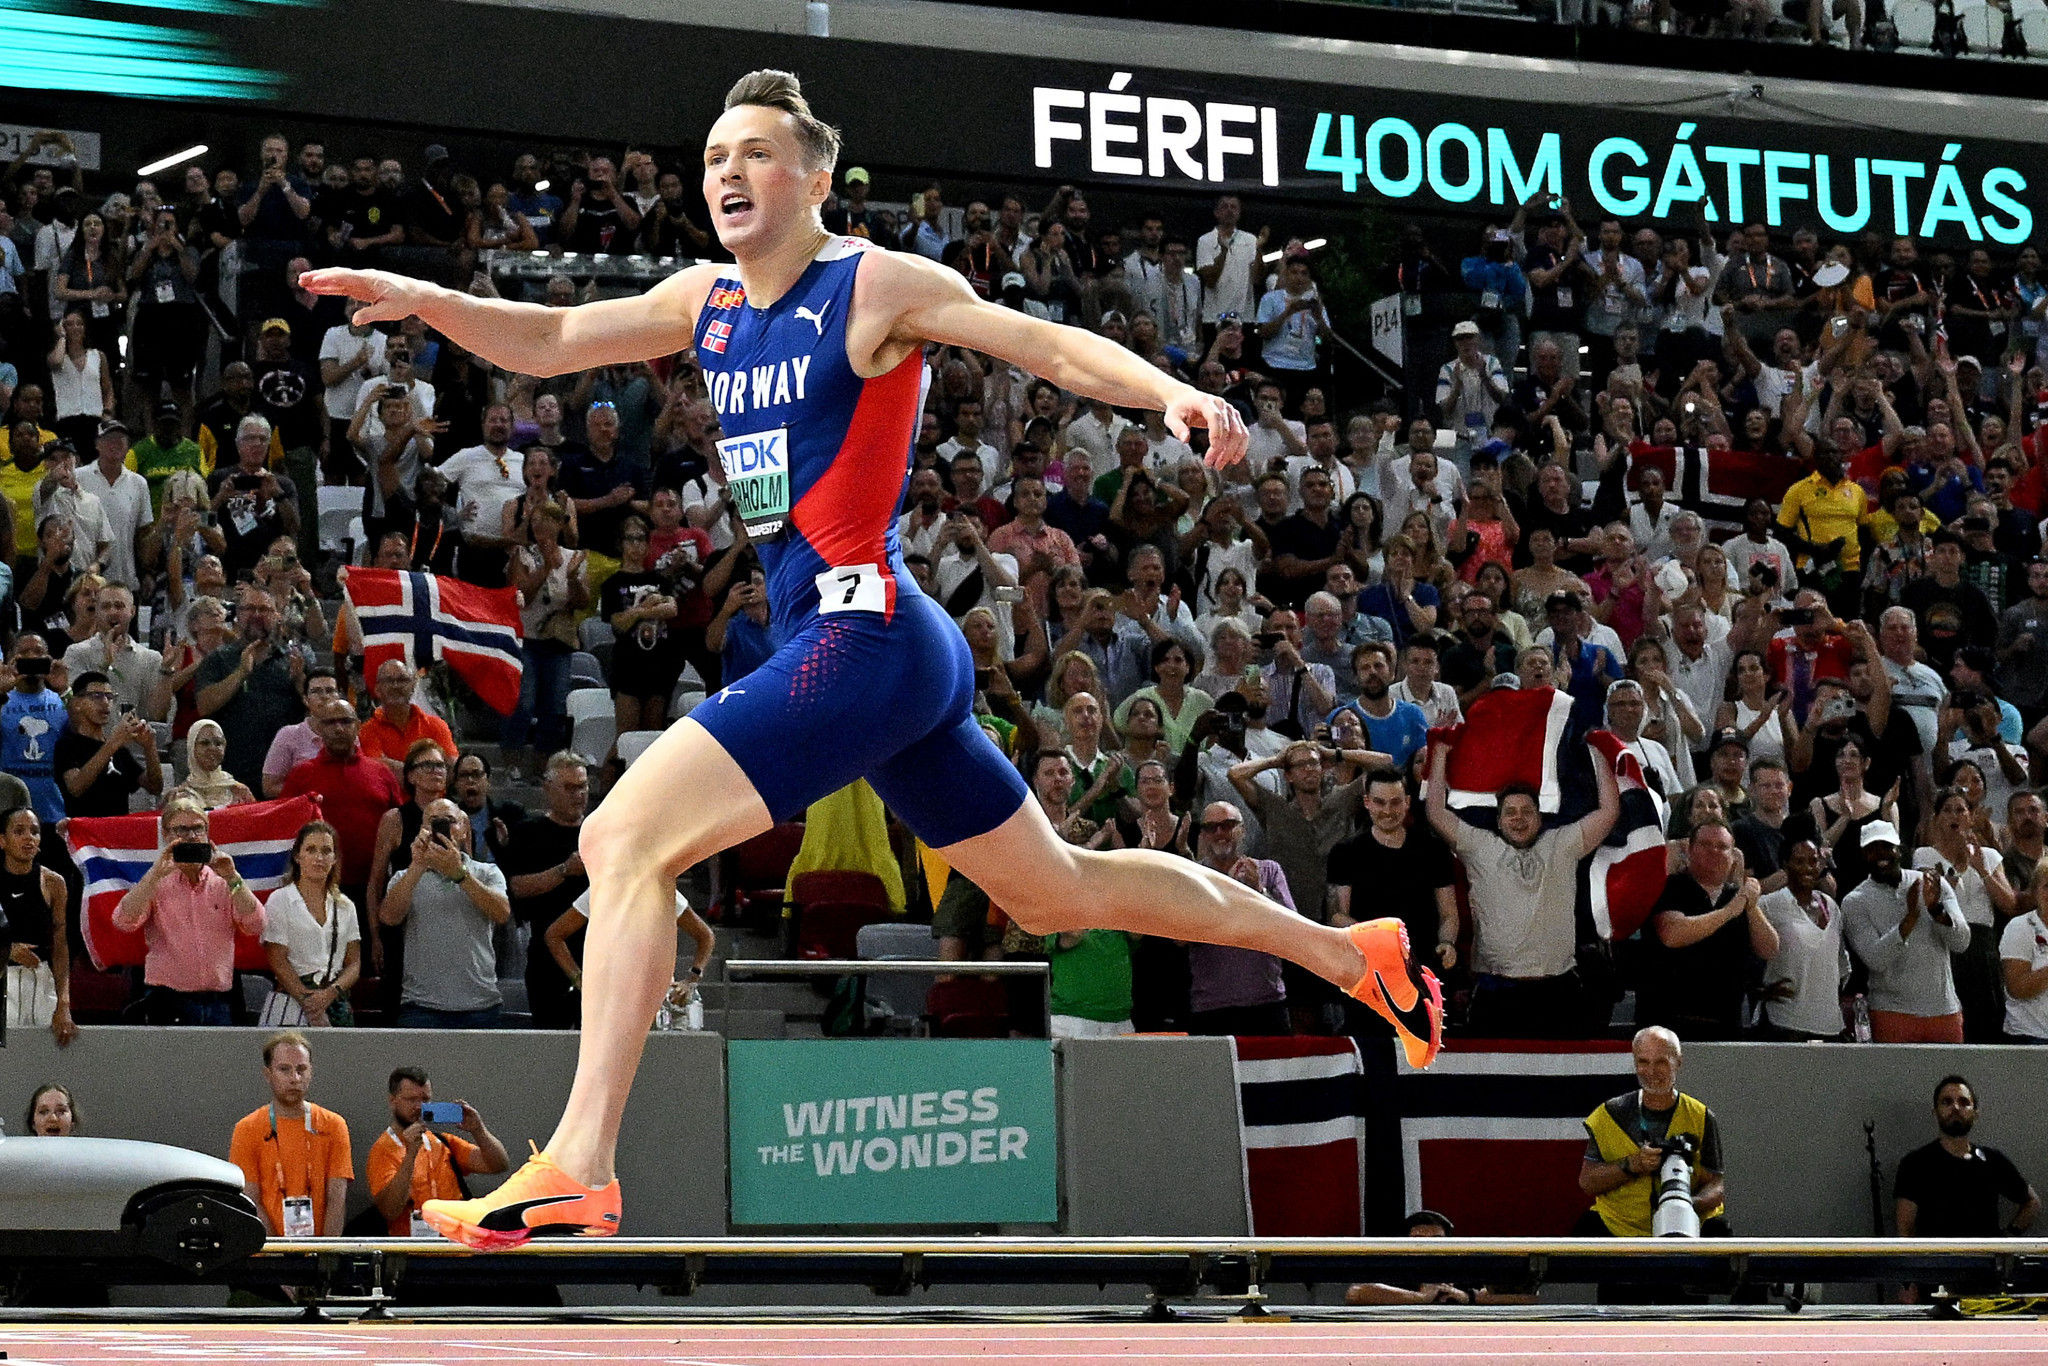 Norway's Karsten Warholm powered to victory in the men's 400m hurdles final to reclaim his world title ©Getty Images